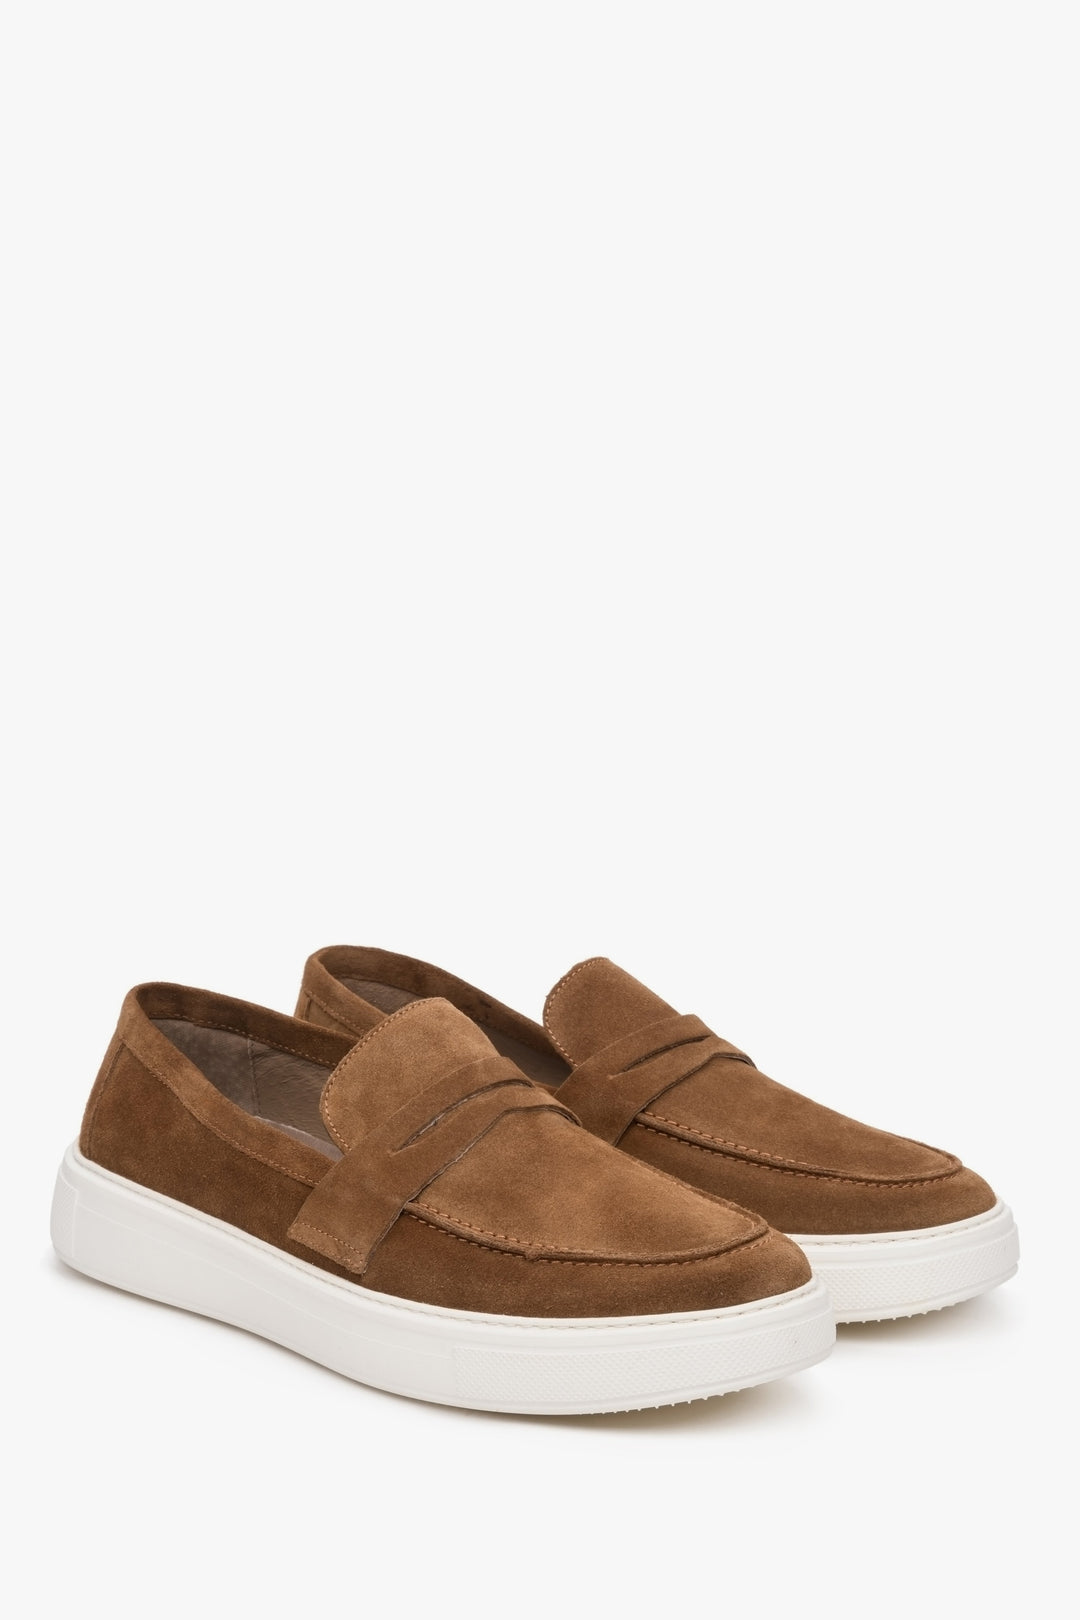 Estro men's brown natural suede moccasins - presentation of the toe and side seam of the shoes.